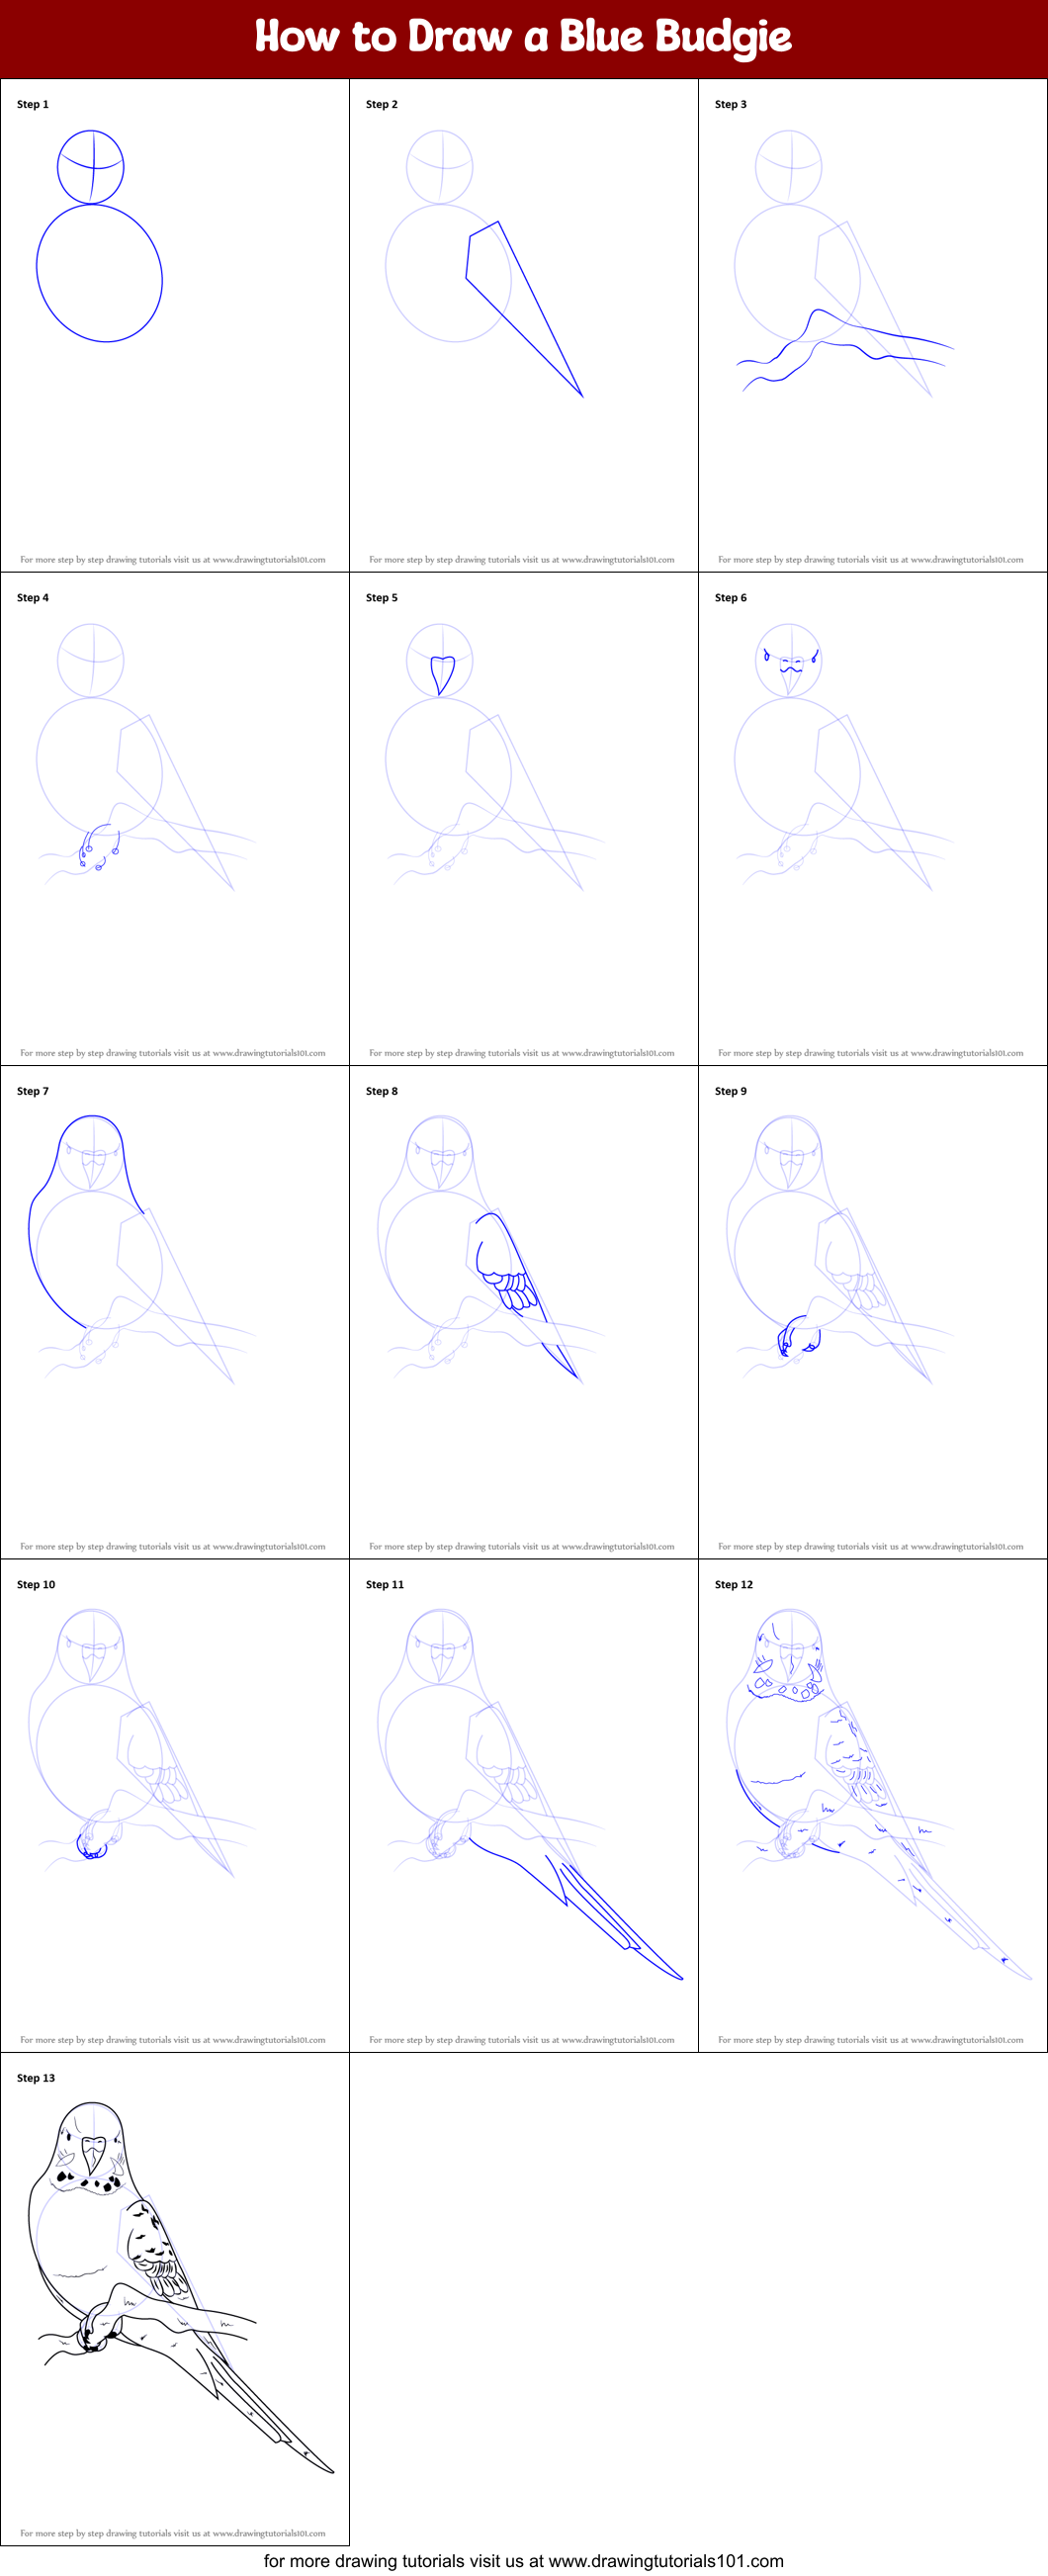 How to Draw a Blue Budgie printable step by step drawing sheet